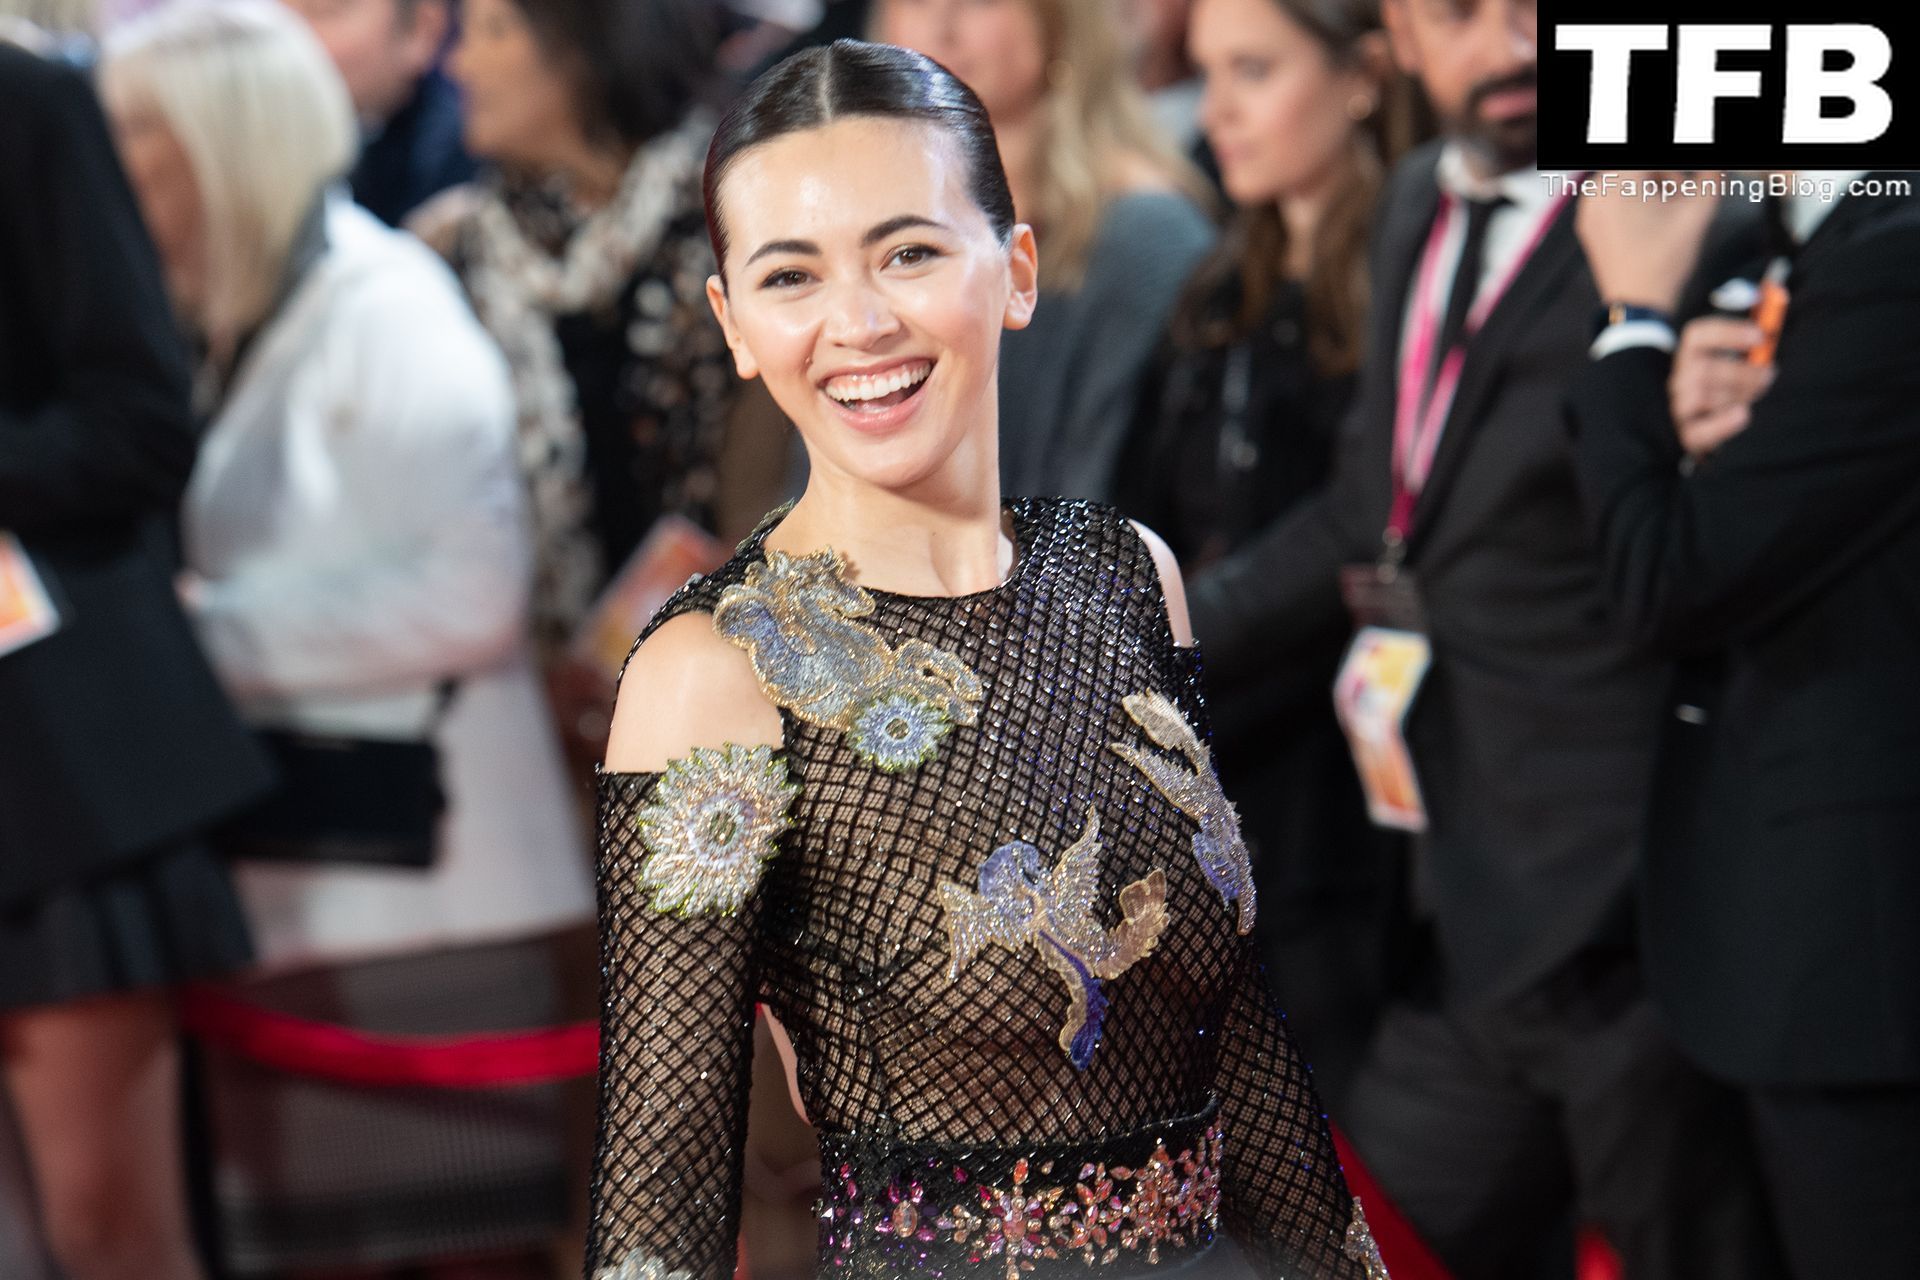 Jessica Henwick Sexy The Fappening Blog 92 - Jessica Henwick Stuns on the Red Carpet at the Premiere of ‘Glass Onion: A Knives Out Mystery’ in London (101 Photos)